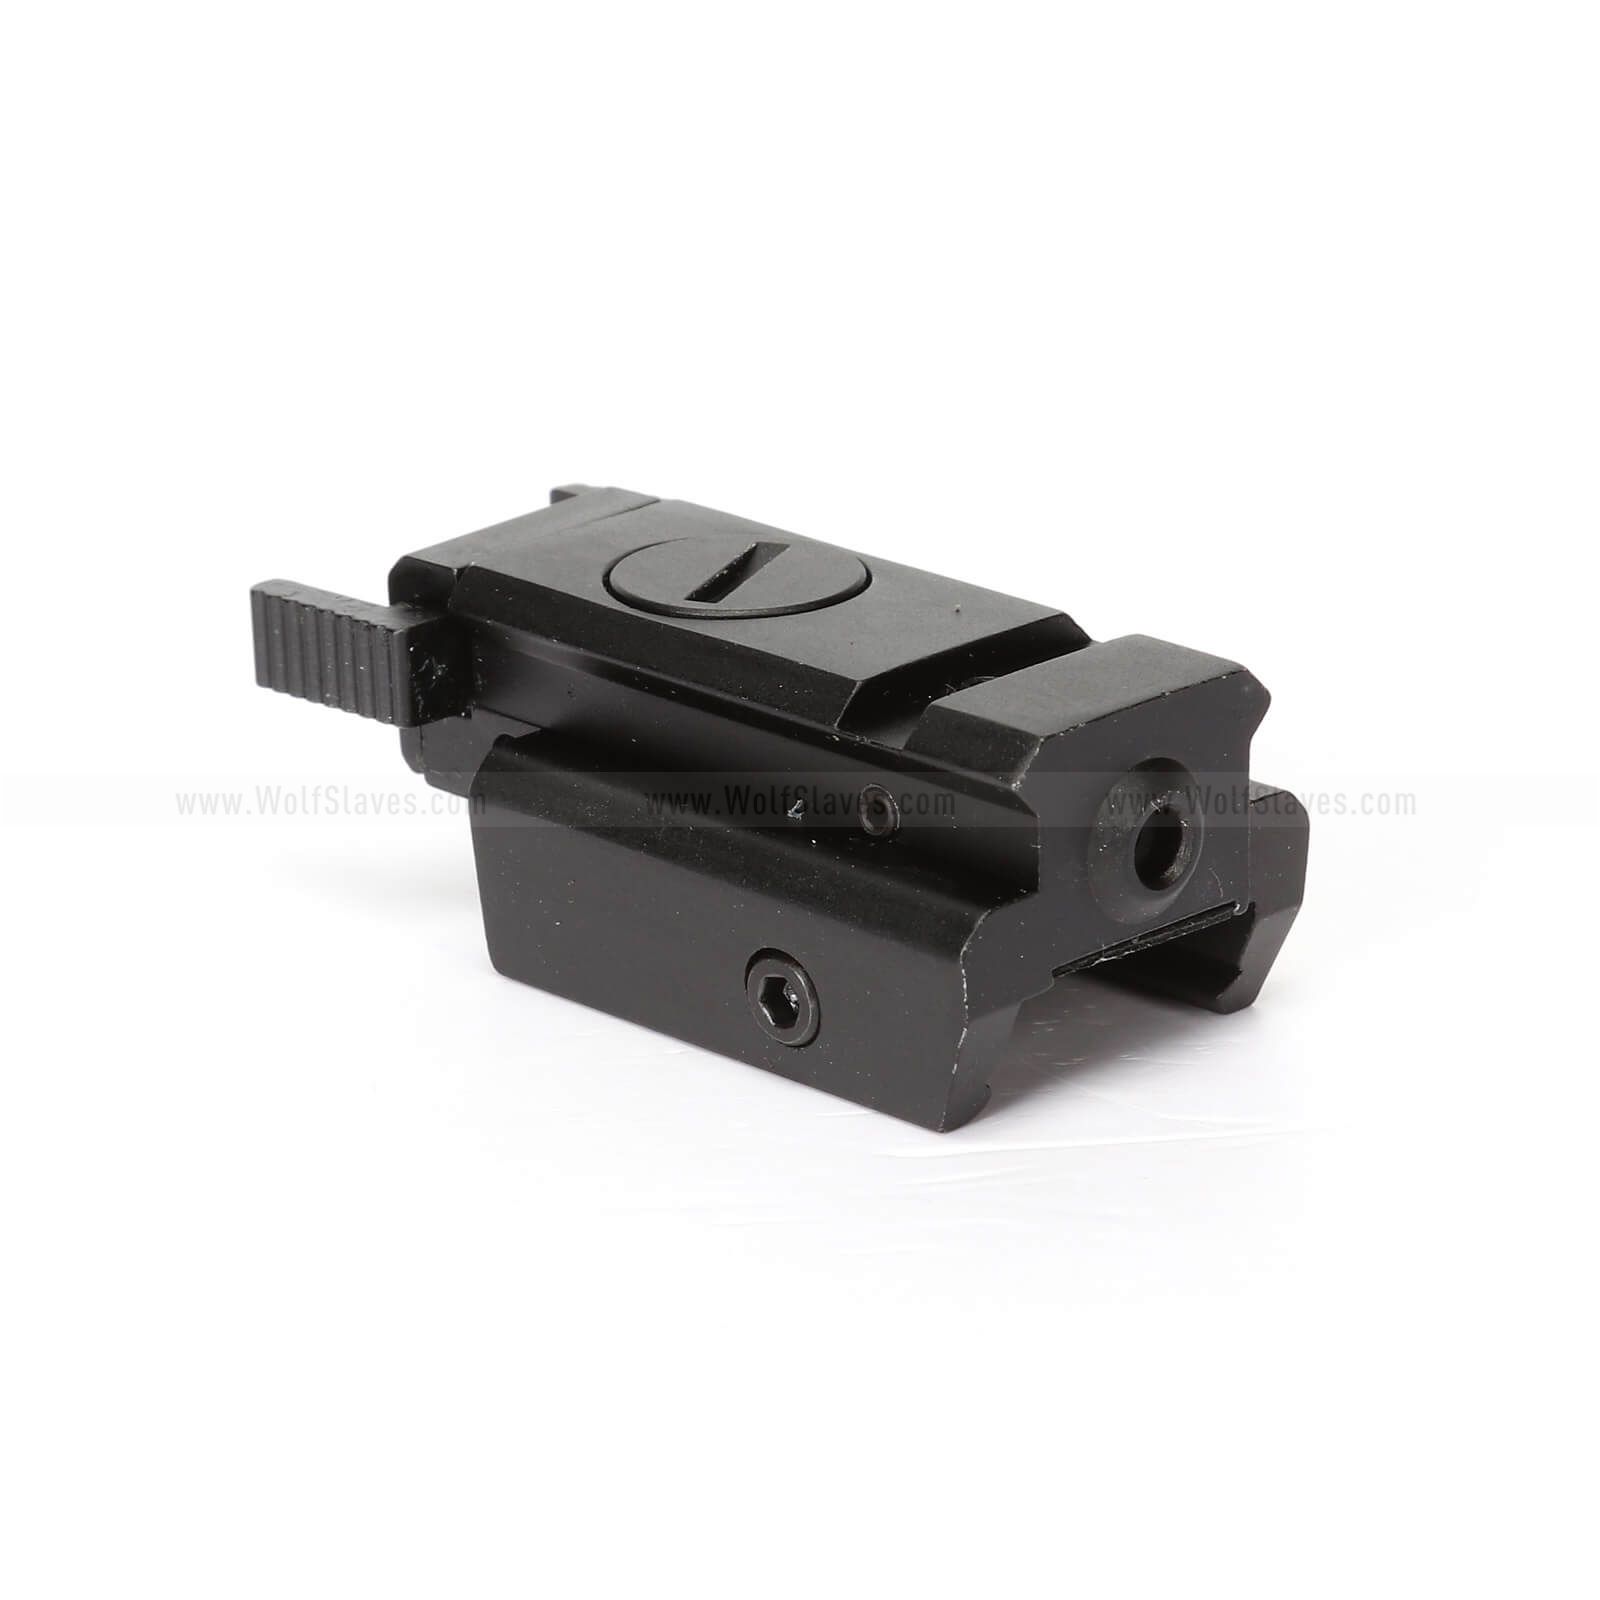 Details about   US Low Profile Red Dot Laser Sight For Pistol Rifle 20mm Picatinny Weaver Rail 